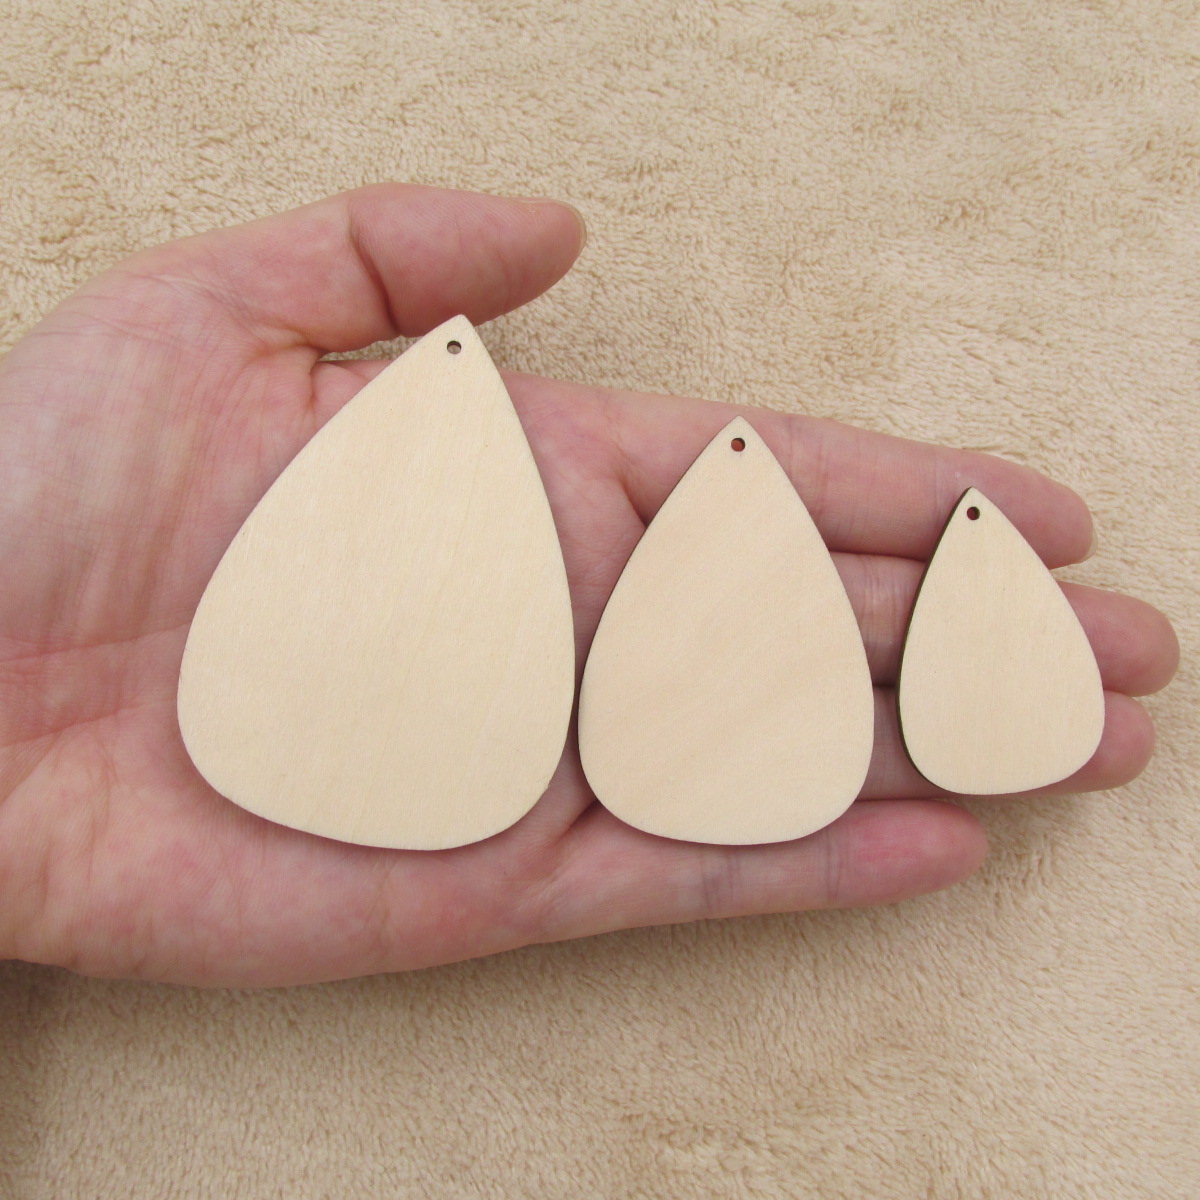 Unfinished Waterdrop Shapes Plywood Blank Wood Cutouts Crafts For Earrings Jewelry DIY Project